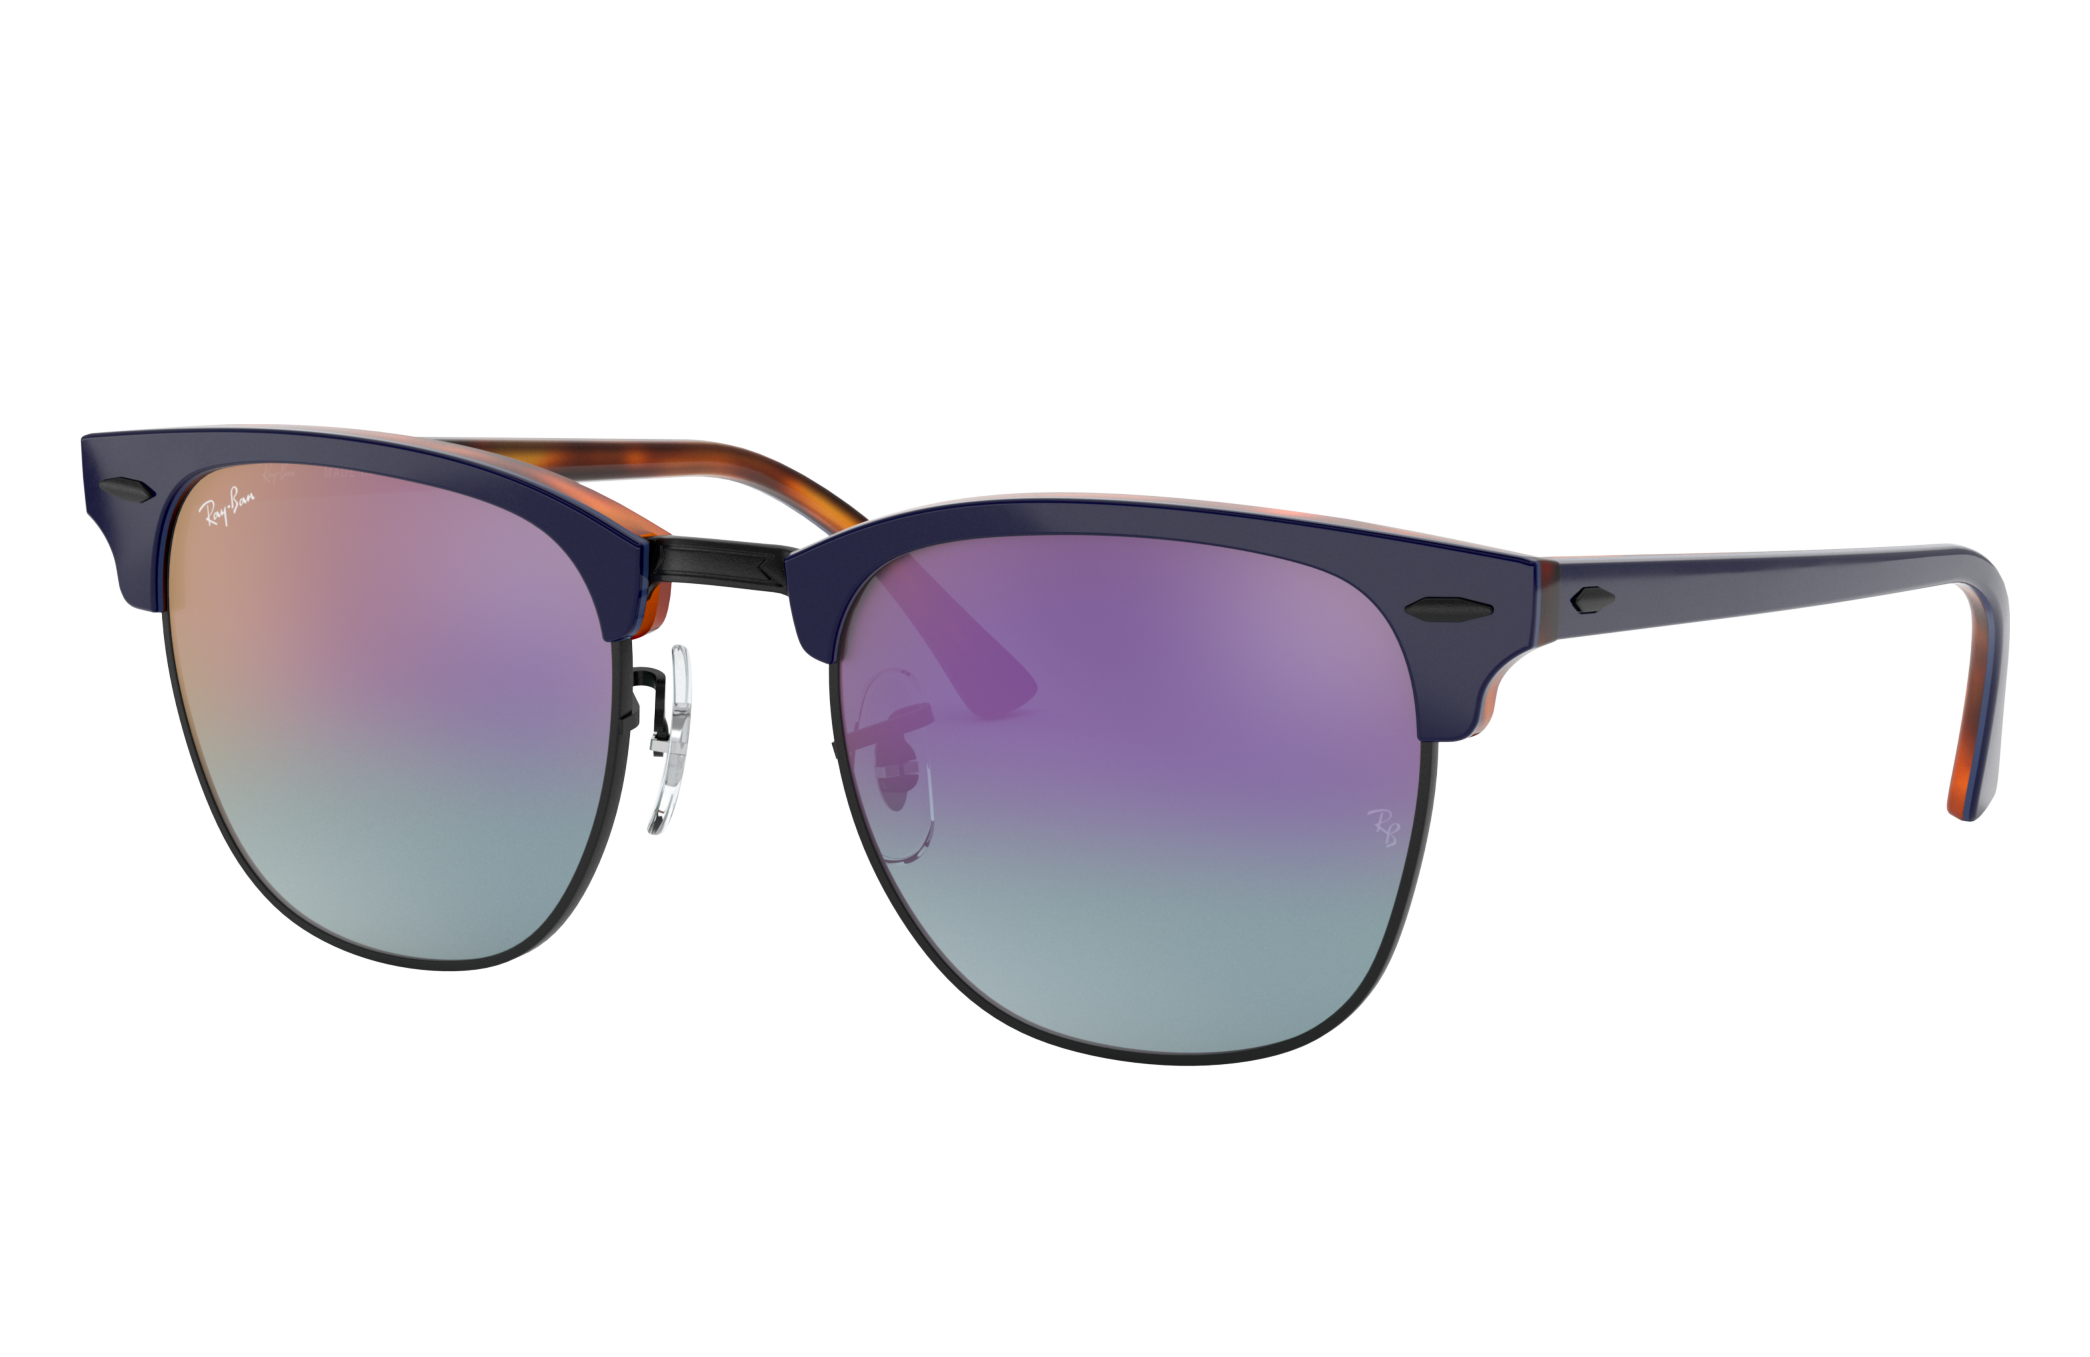 ray ban clubmaster pink mirror